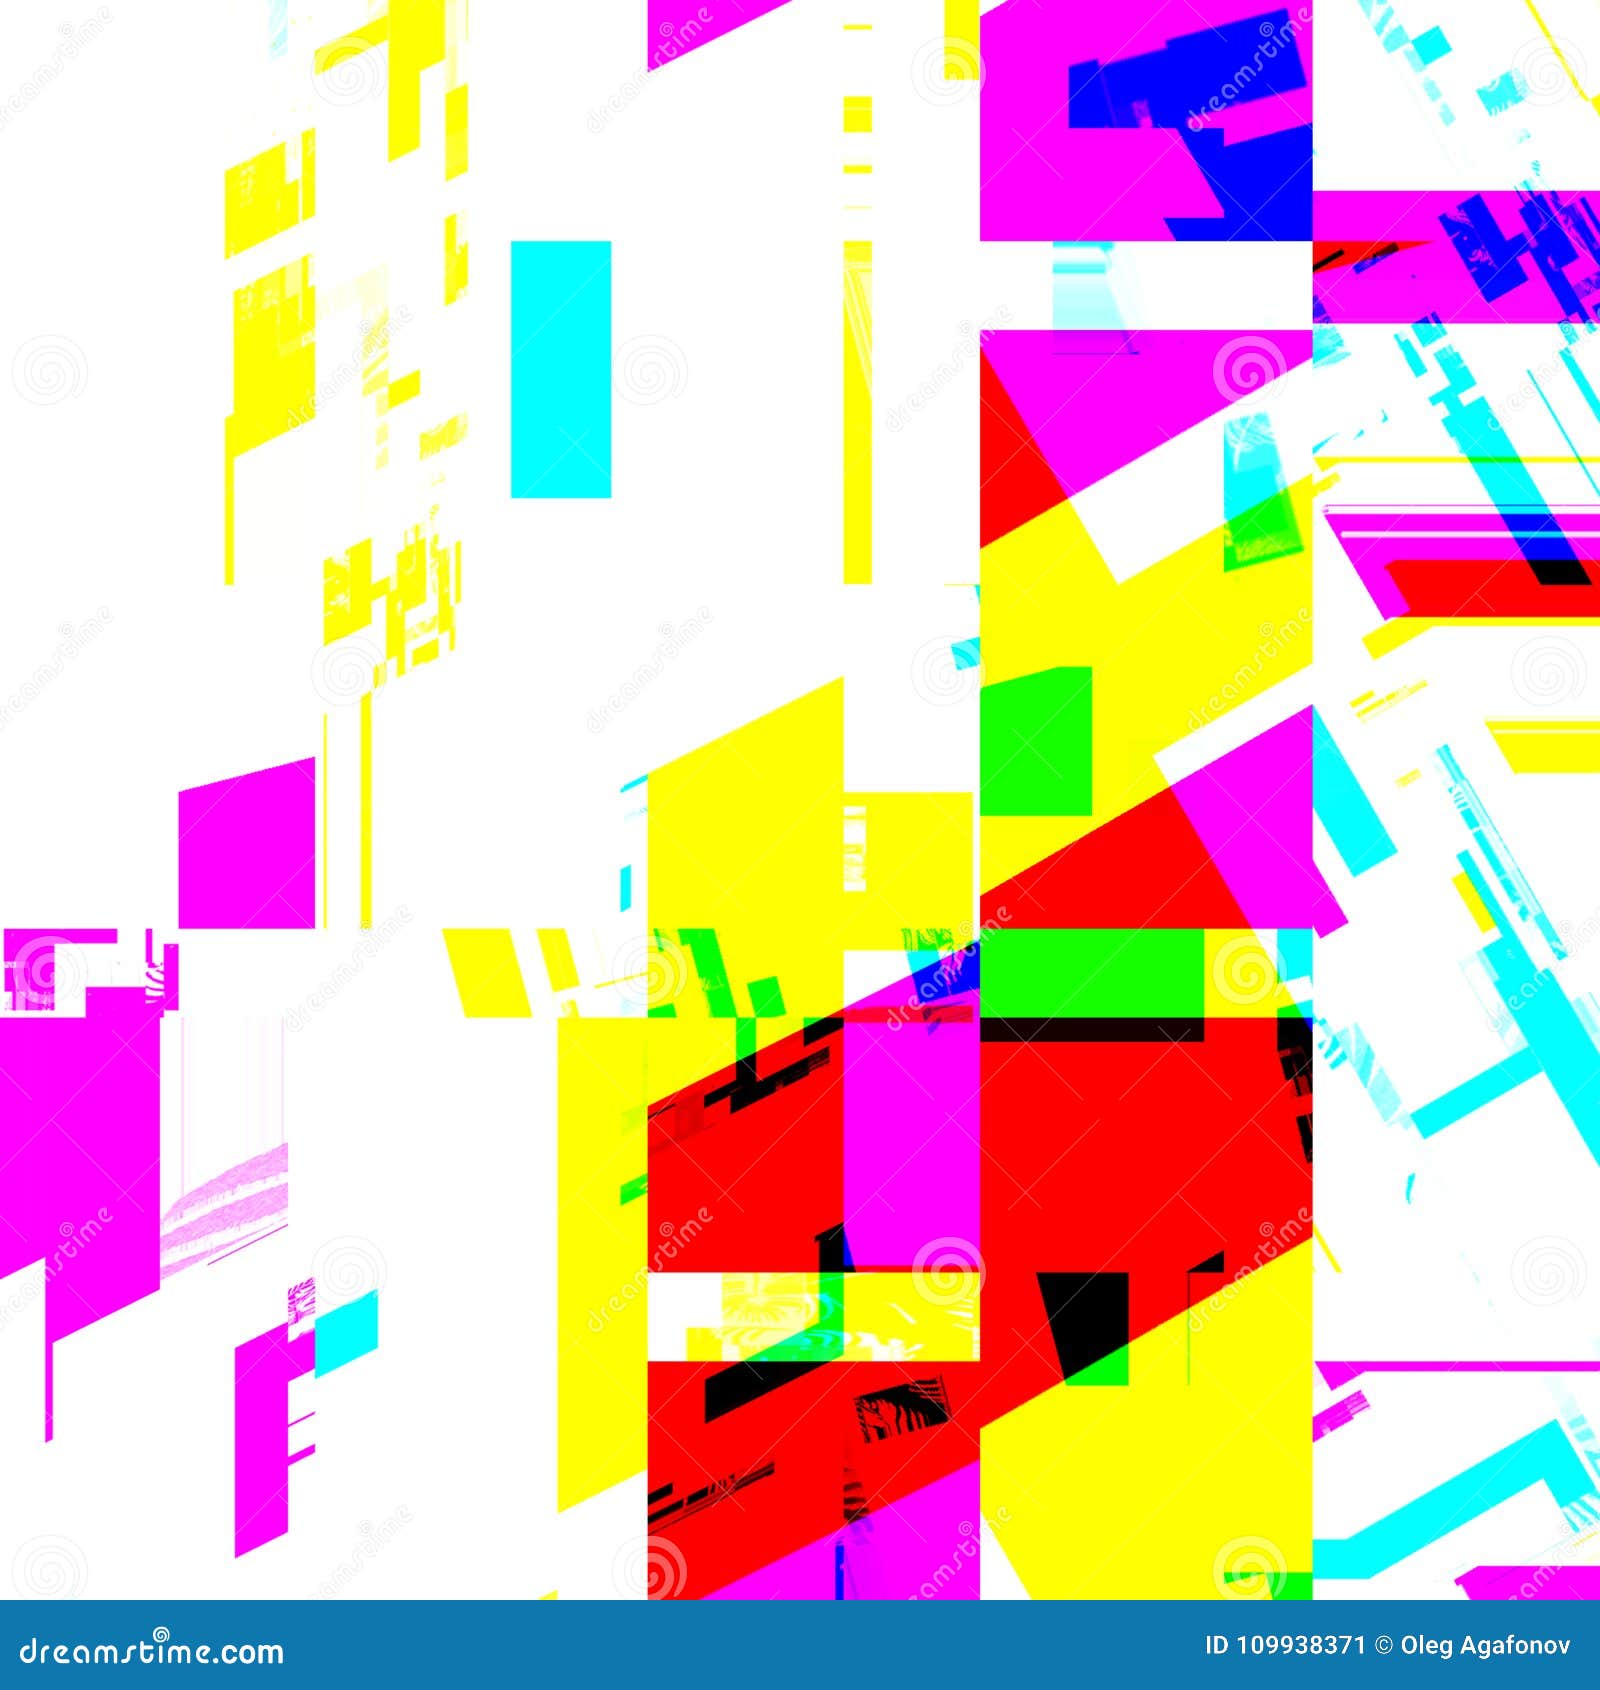 Abstract Chemical Glitching Effect. Random Digital Signal Error. Abstract  Contemporary Texture Background Colorful Pixel Mosaic Stock Illustration -  Illustration of glitched, error: 109938387